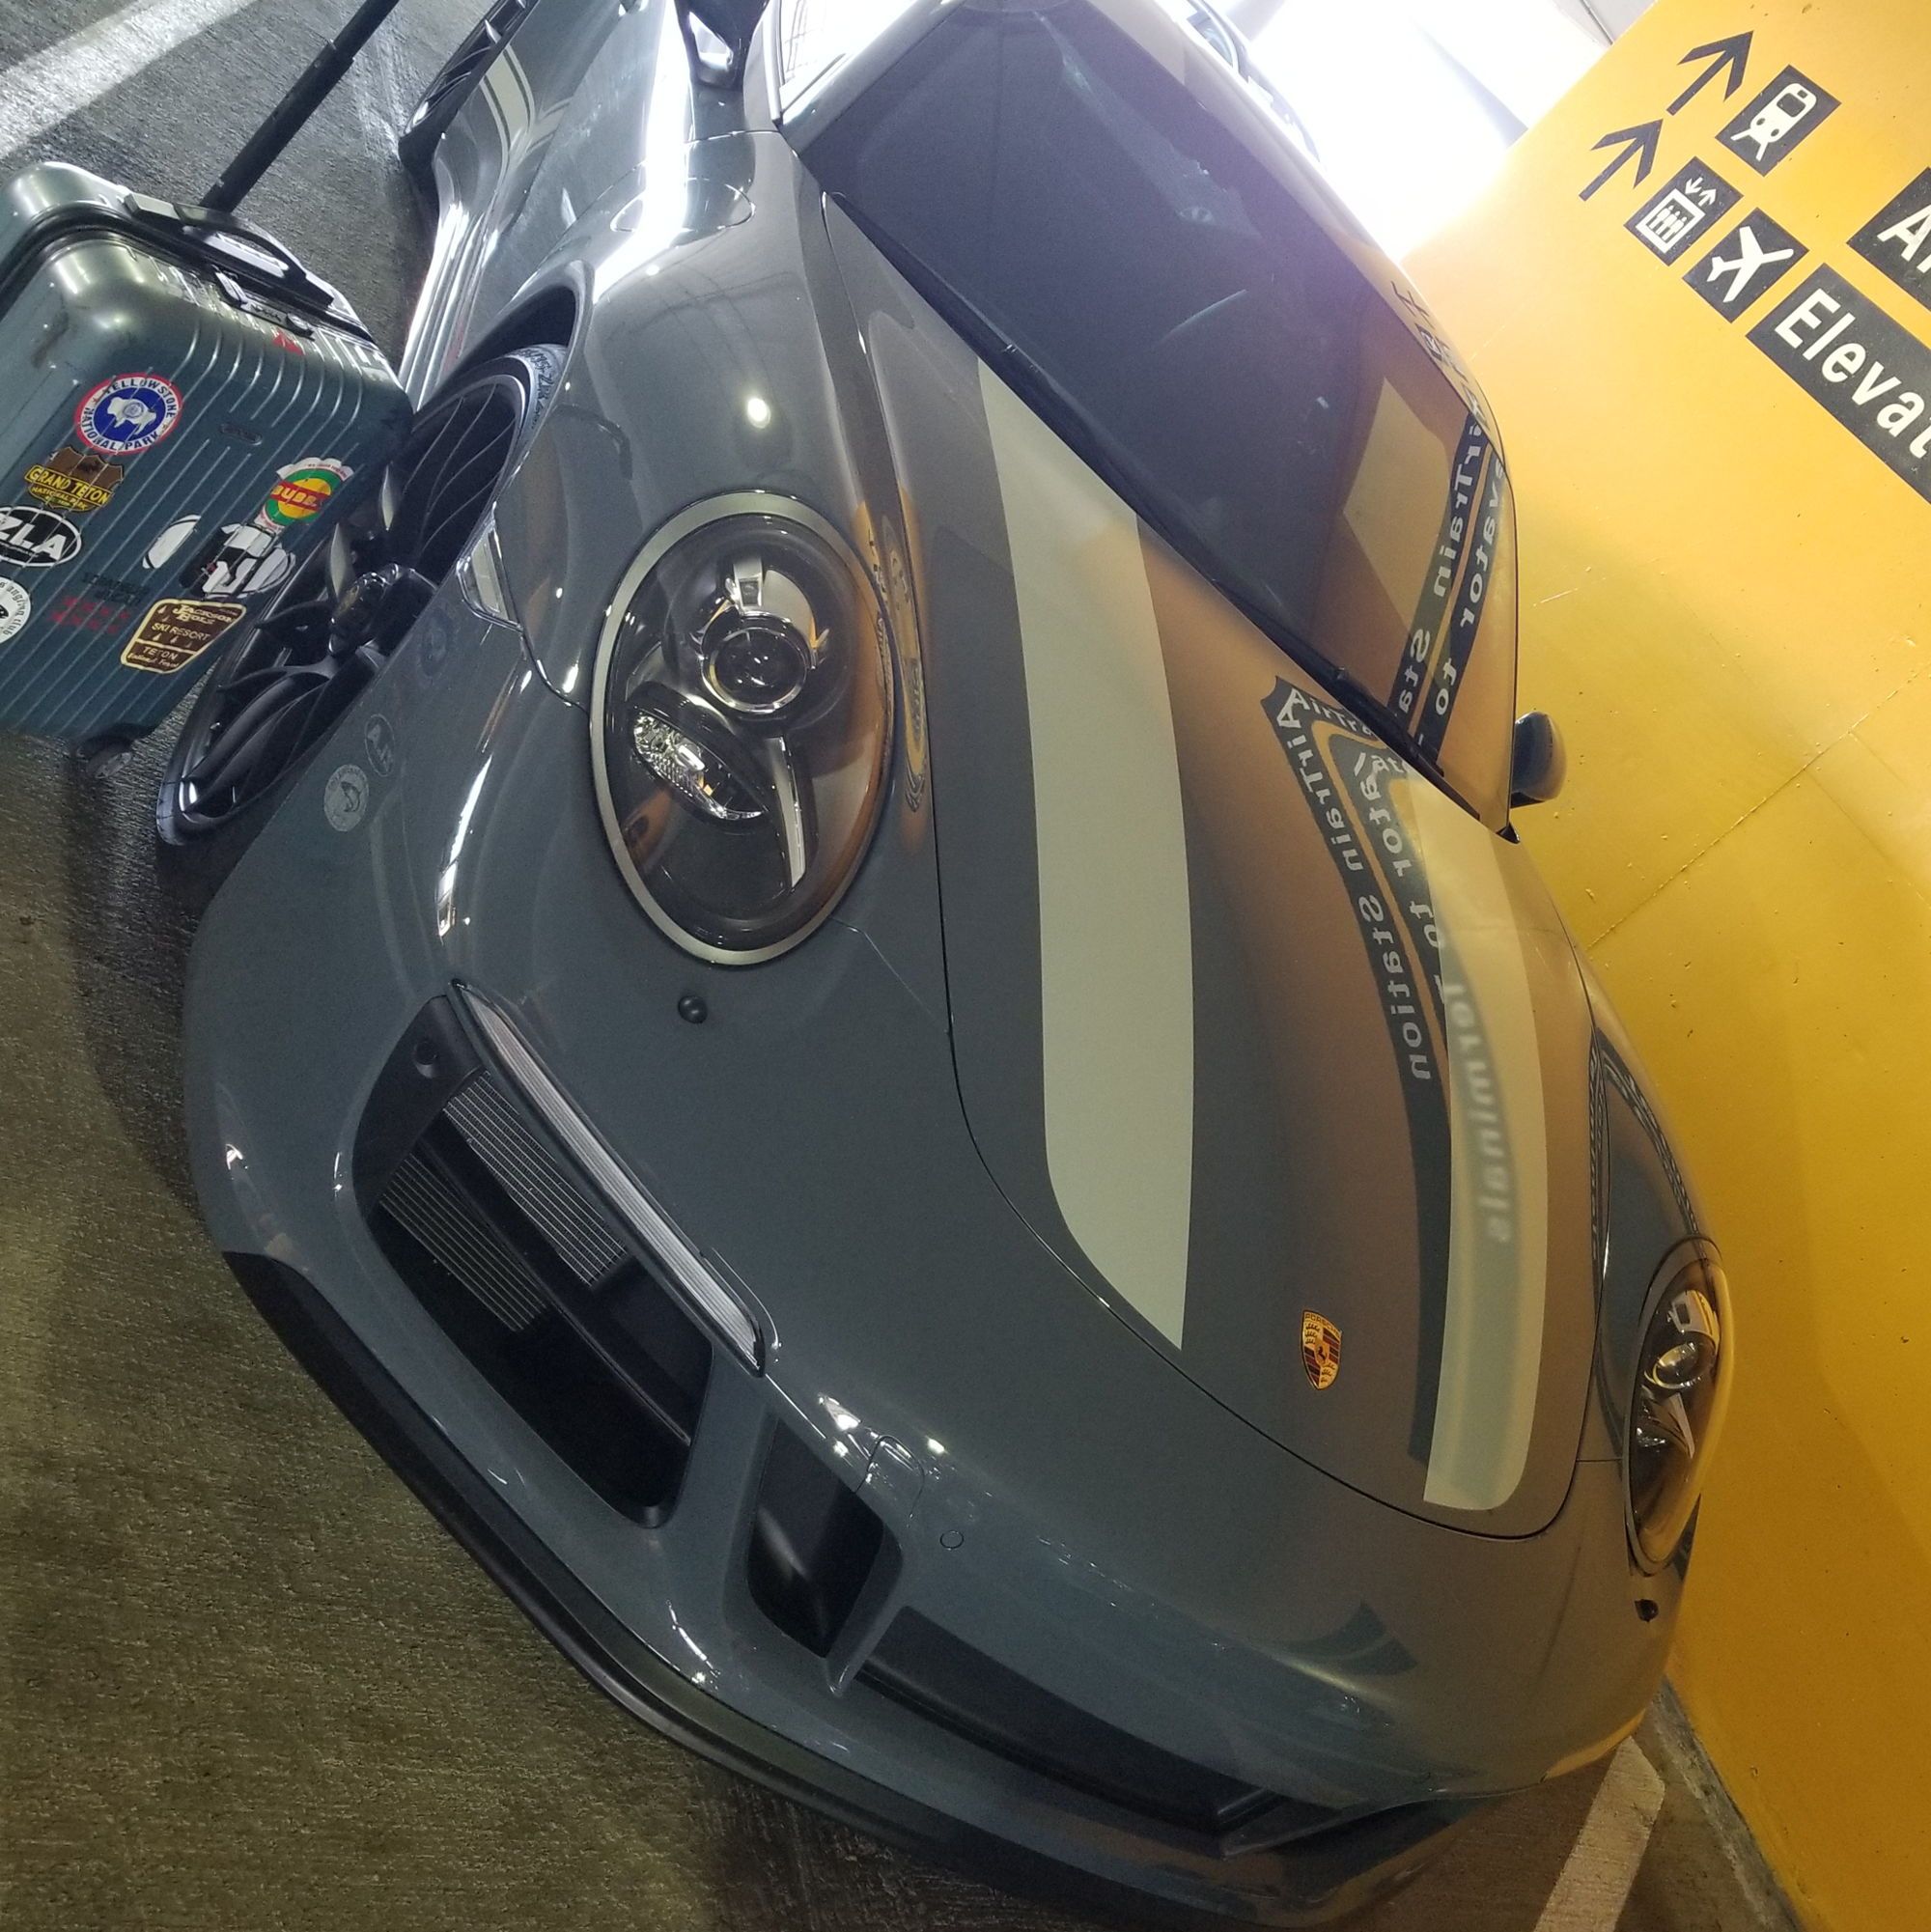 911 Carrera GTS at airport, suitcase beside it